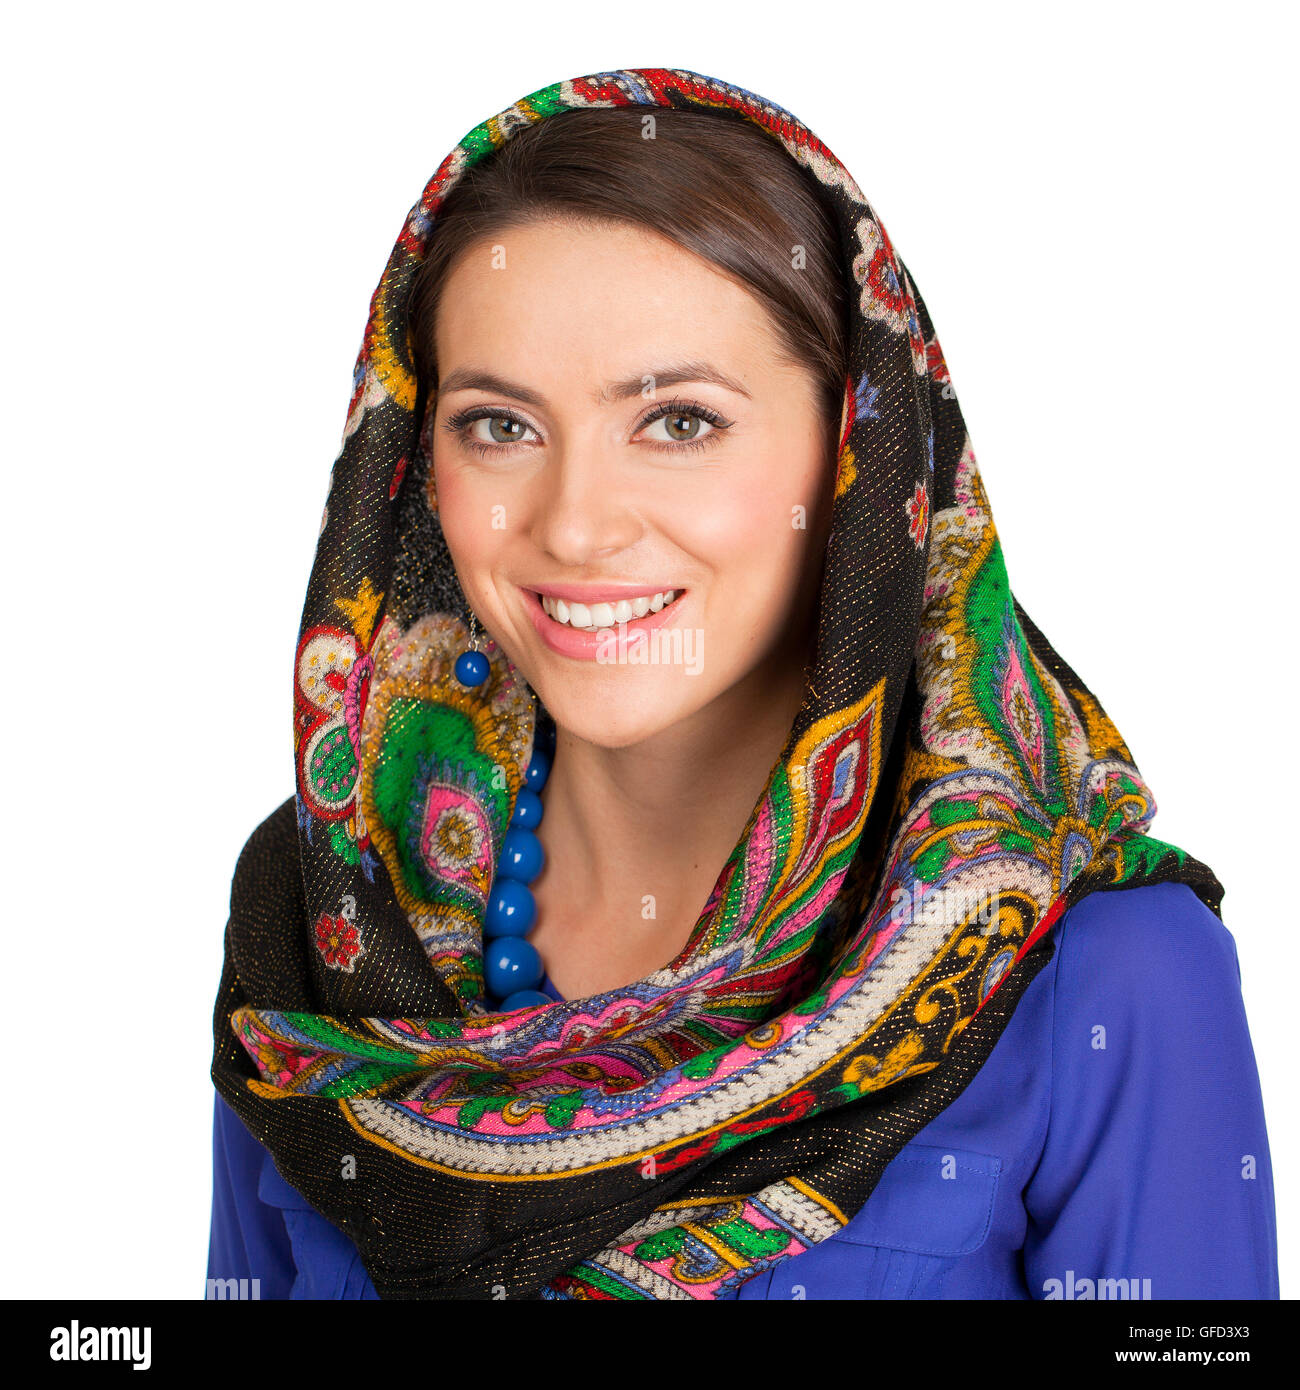 https://c8.alamy.com/comp/GFD3X3/russian-beauty-woman-in-the-national-patterned-shawl-GFD3X3.jpg